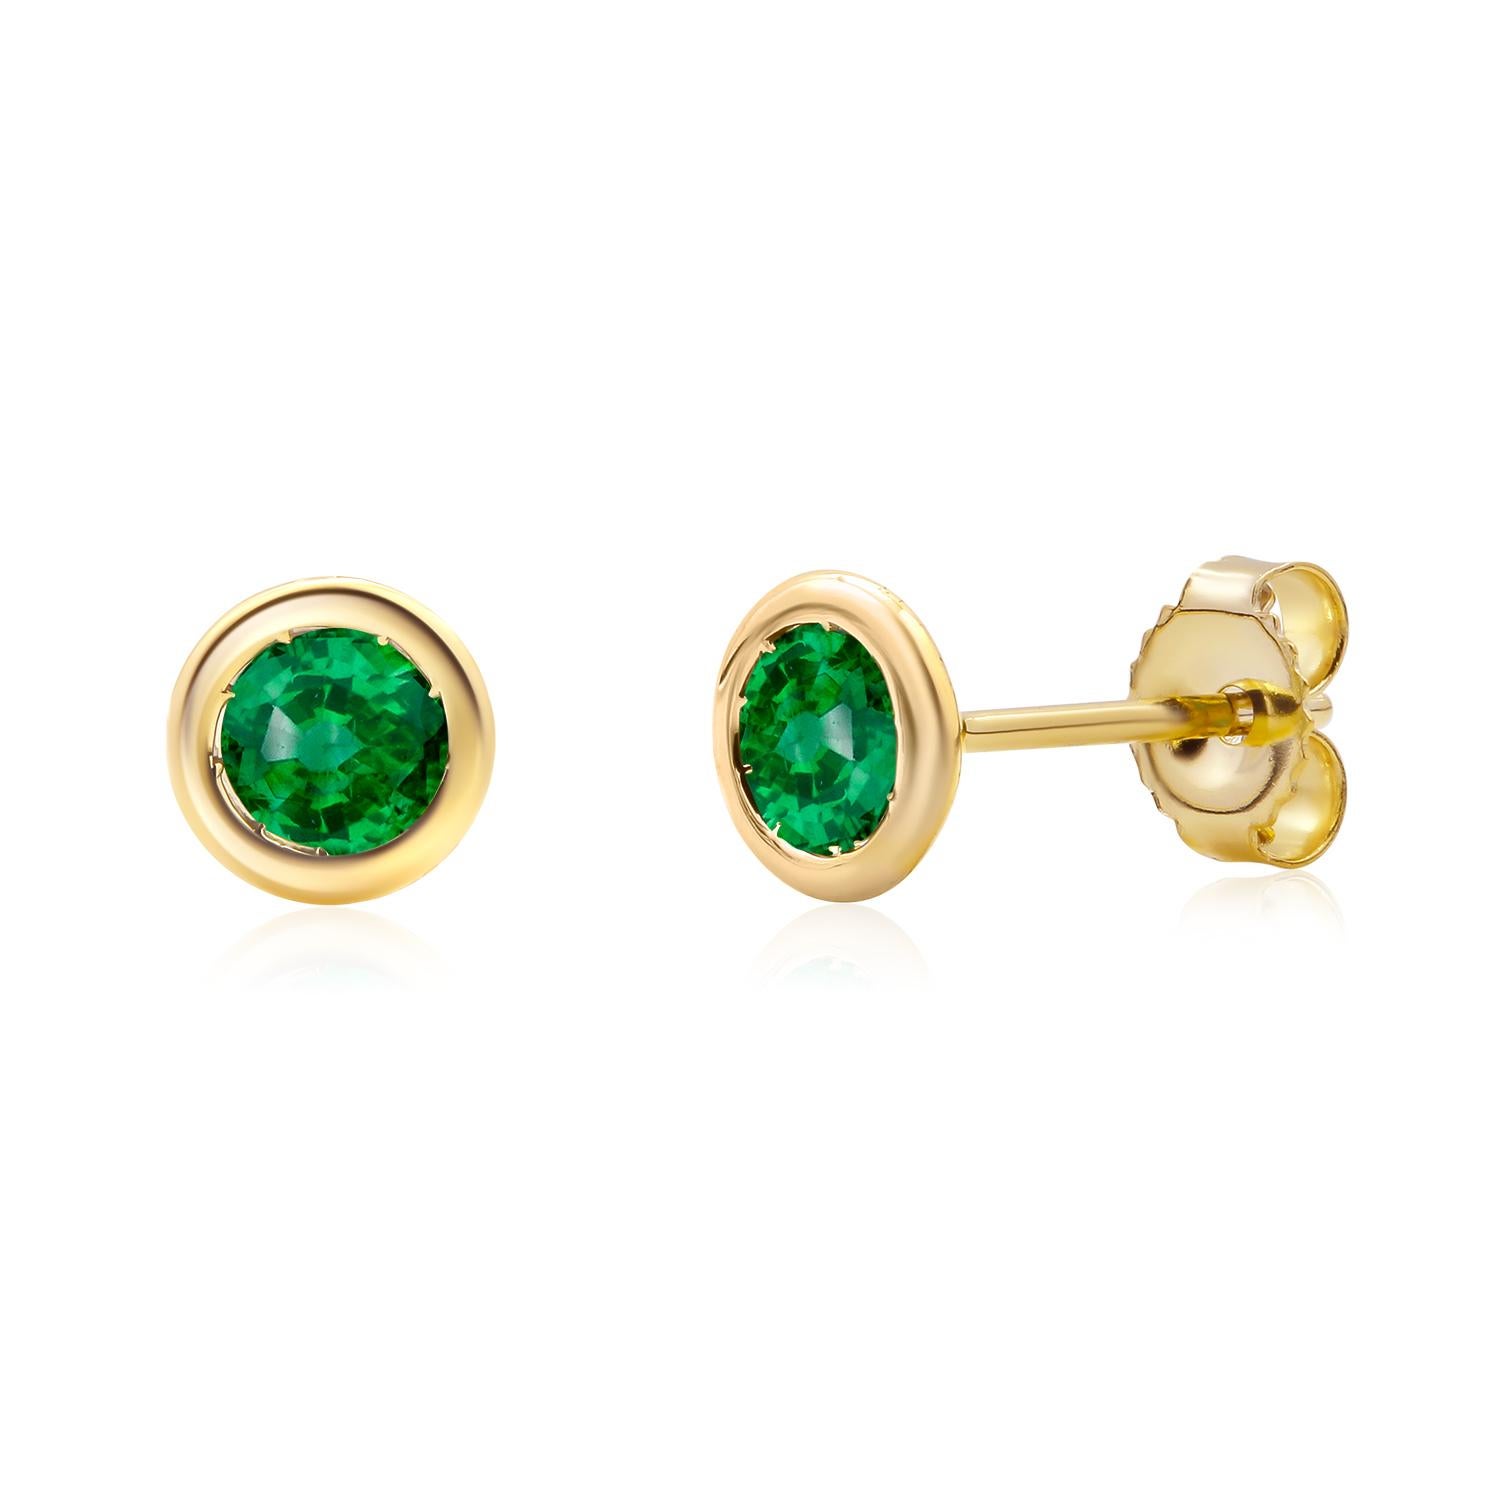 Matched Round Emerald 0.40 Carats Bezel Set Yellow Gold 0.23 Inch Stud Earrings 1